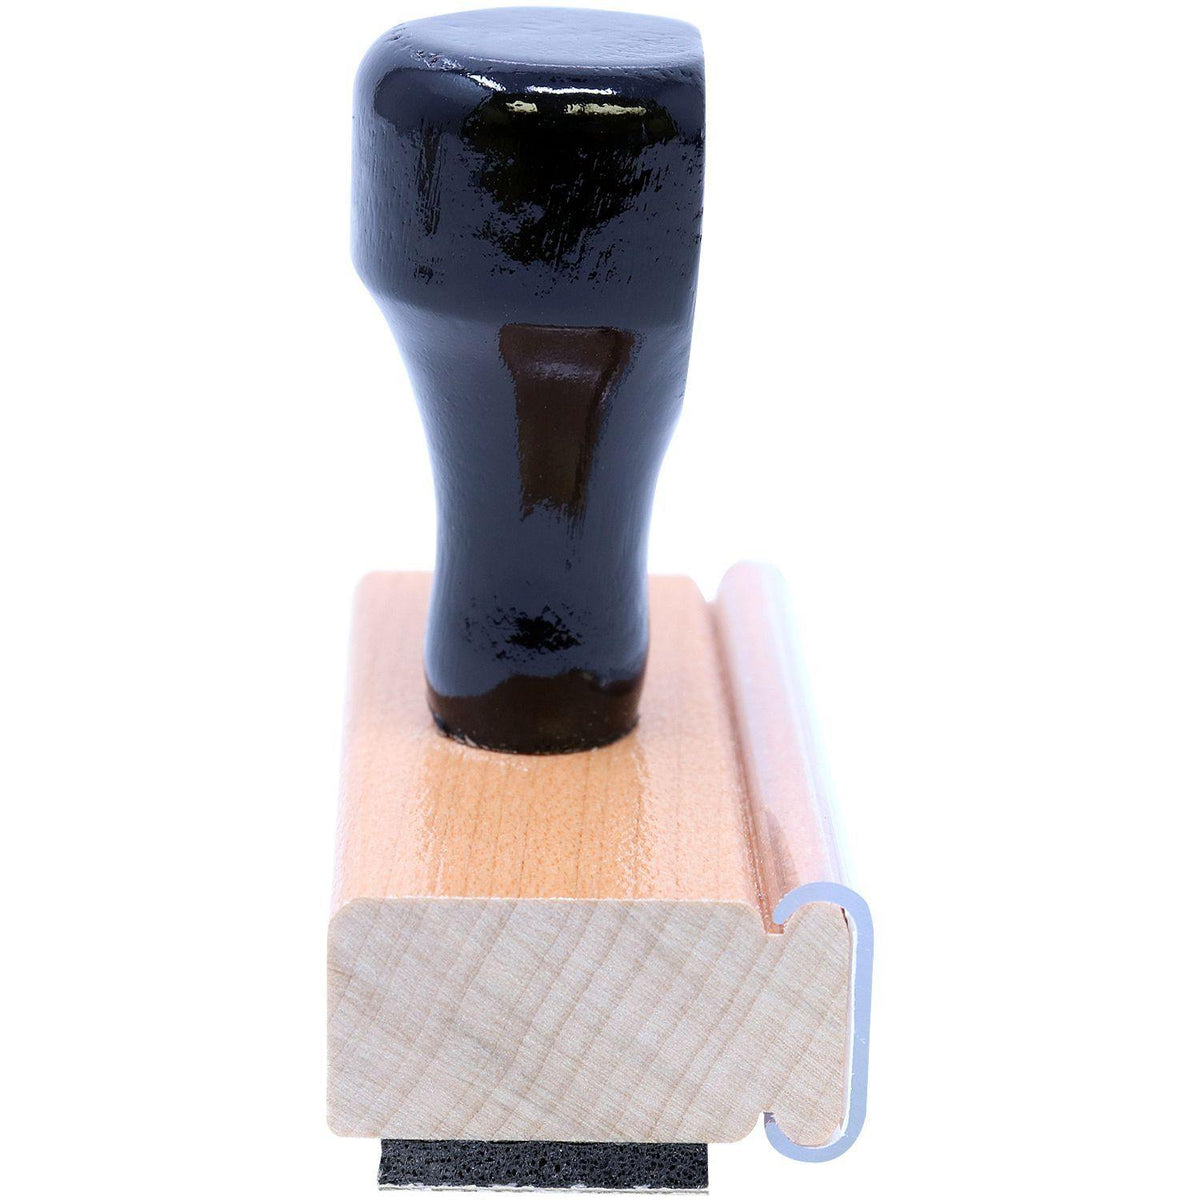 Secondary Insurance Rubber Stamp - Engineer Seal Stamps - Brand_Acorn, Impression Size_Small, Stamp Type_Regular Stamp, Type of Use_Medical Office